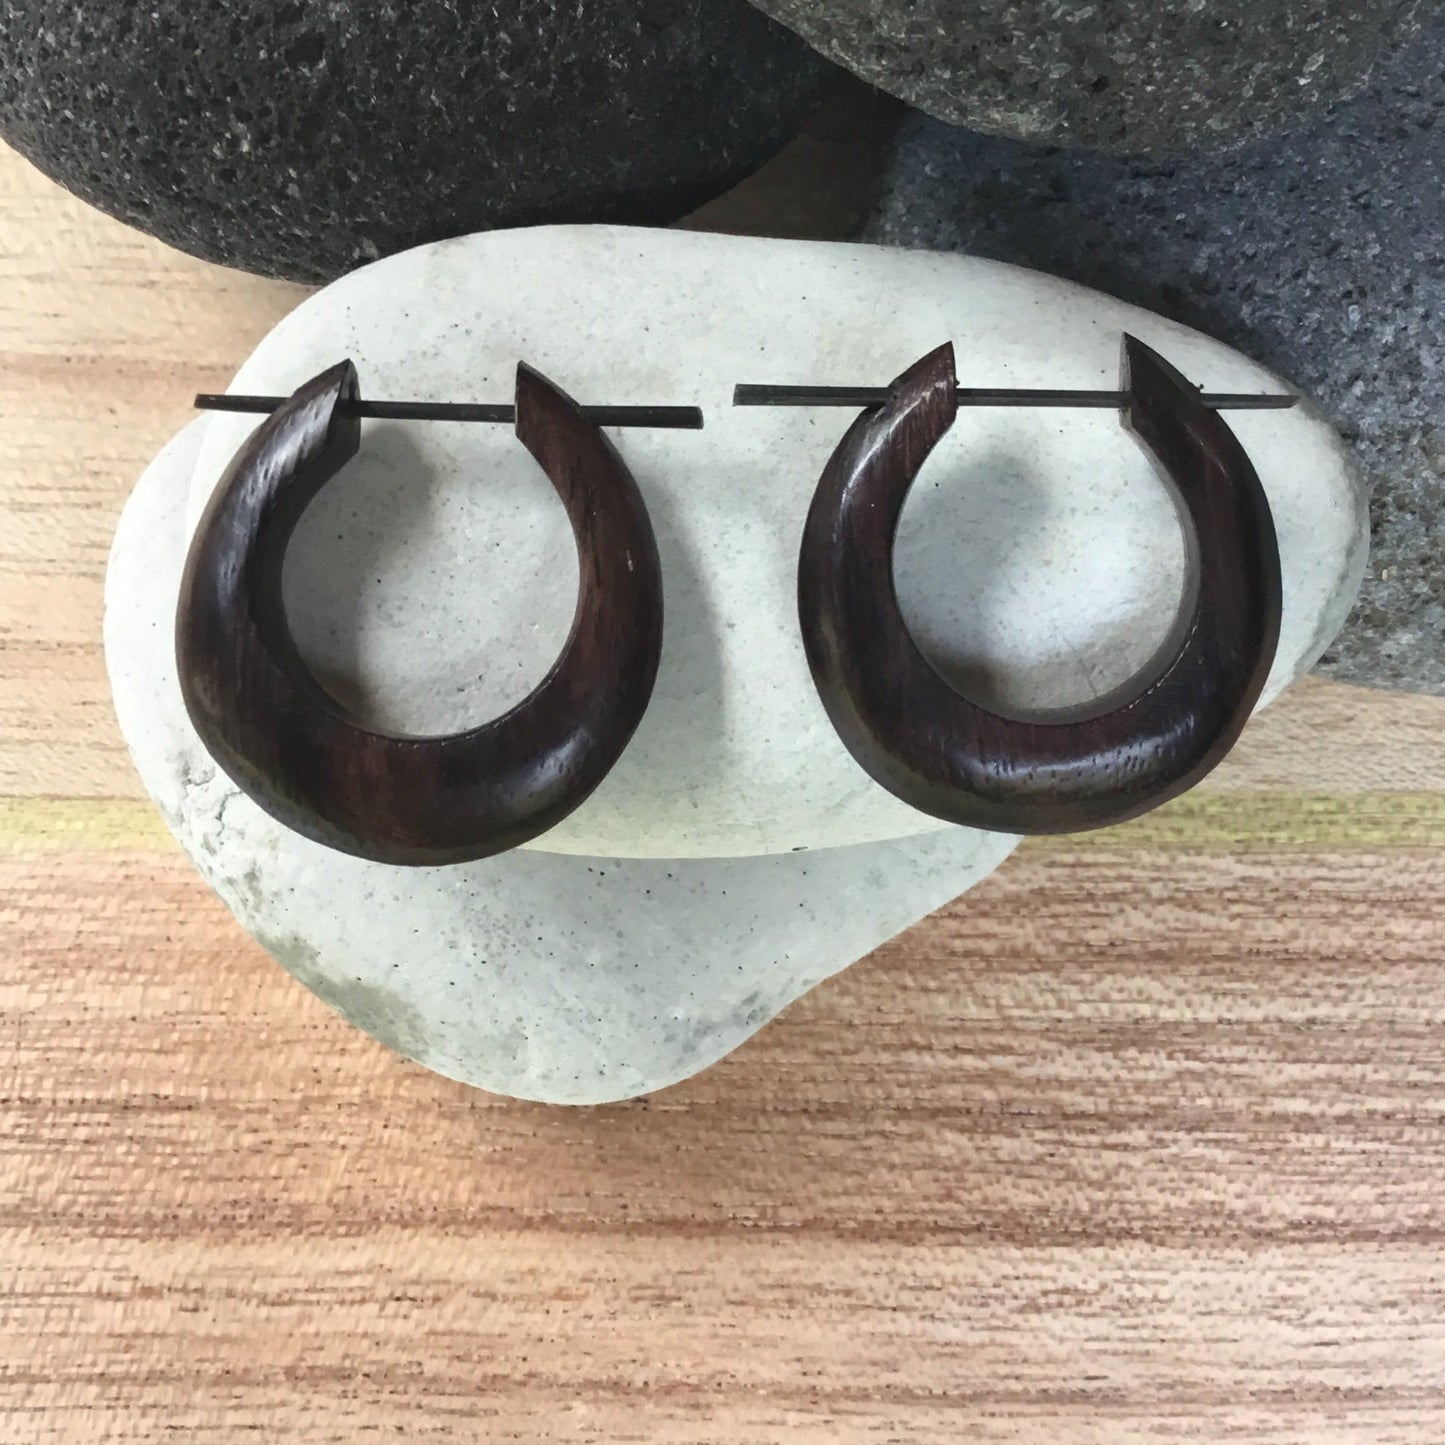 Hoop Earrings, 1 inches W x 1 inches L. Rosewood.